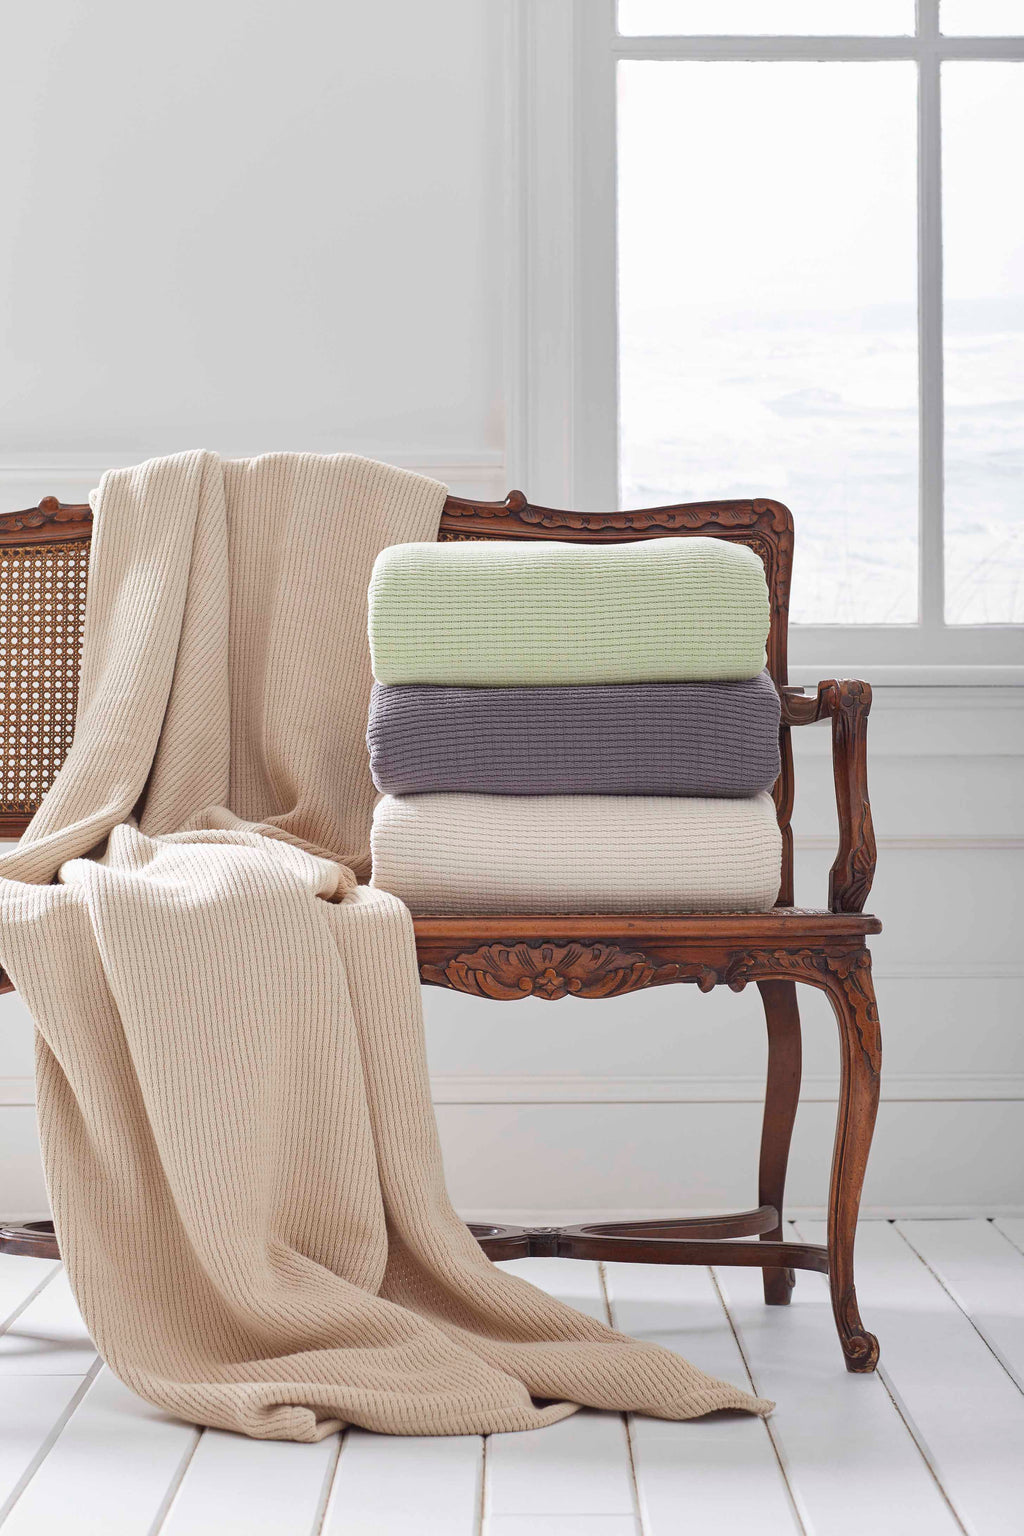 Sea Pines Throw Collection